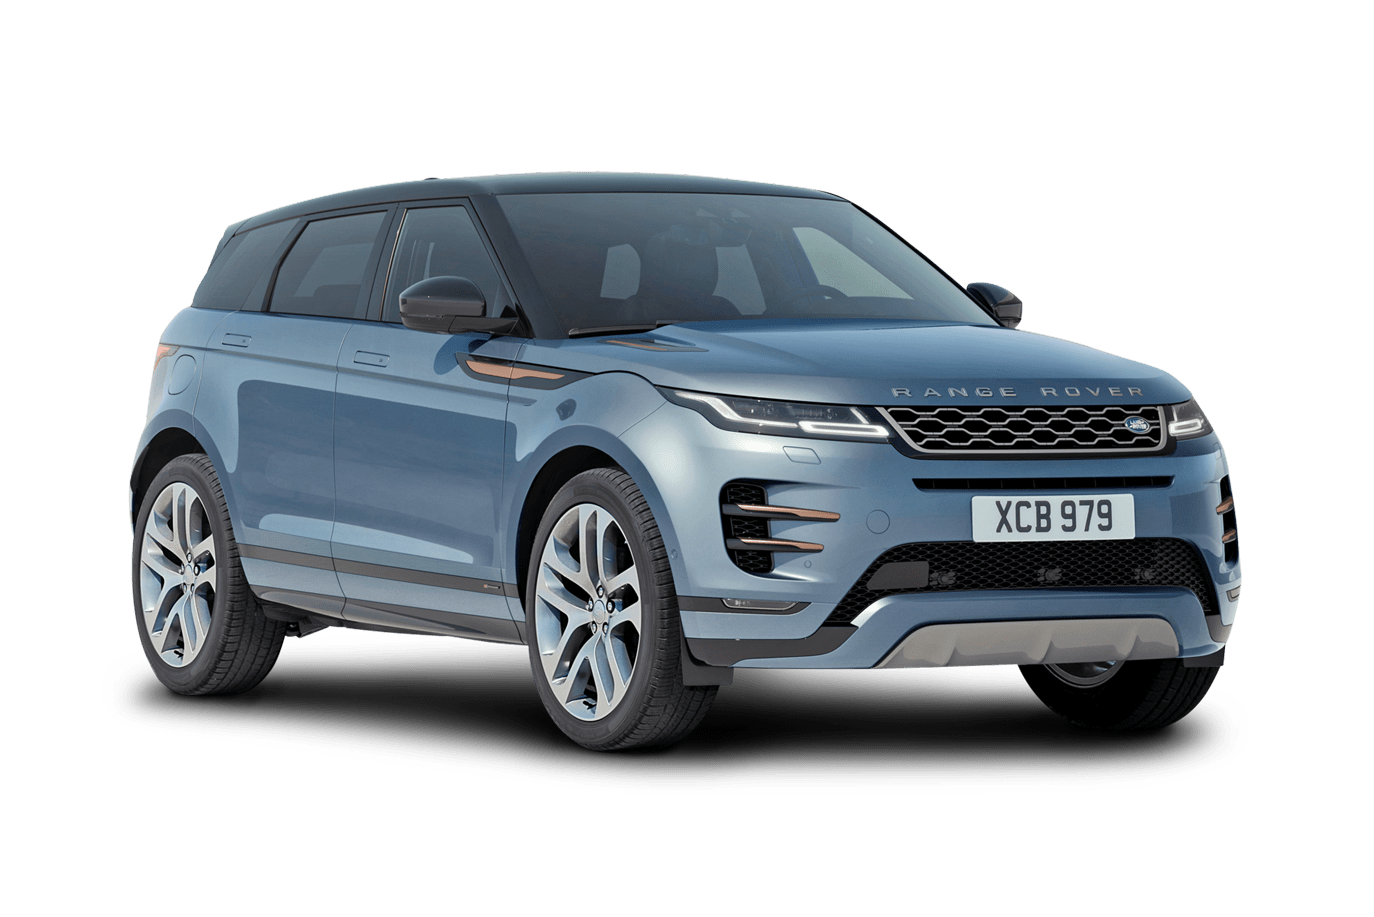 2022 Land Rover Range Rover Evoque Prices, Reviews, and Pictures